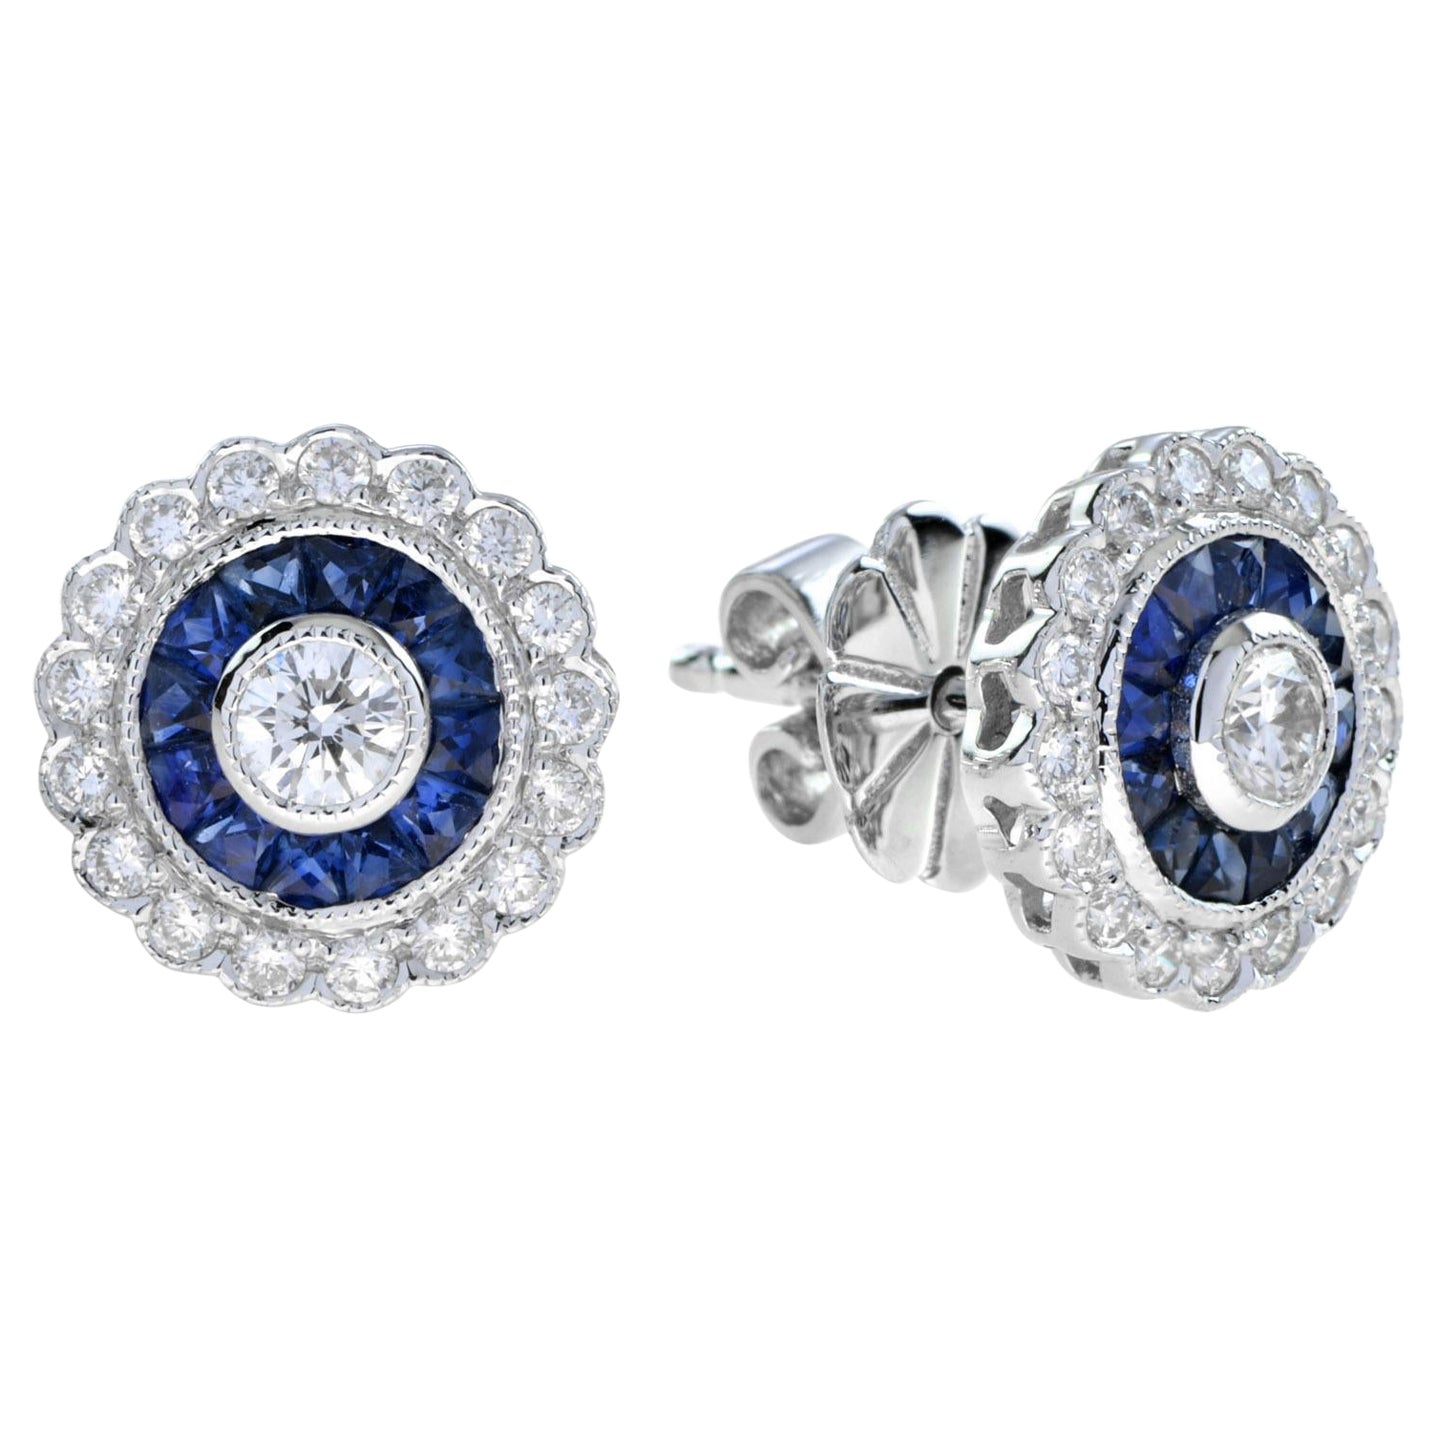 Art Deo Style Round Diamond and Blue Sapphire Stud Earrings in 18K White Gold For Sale